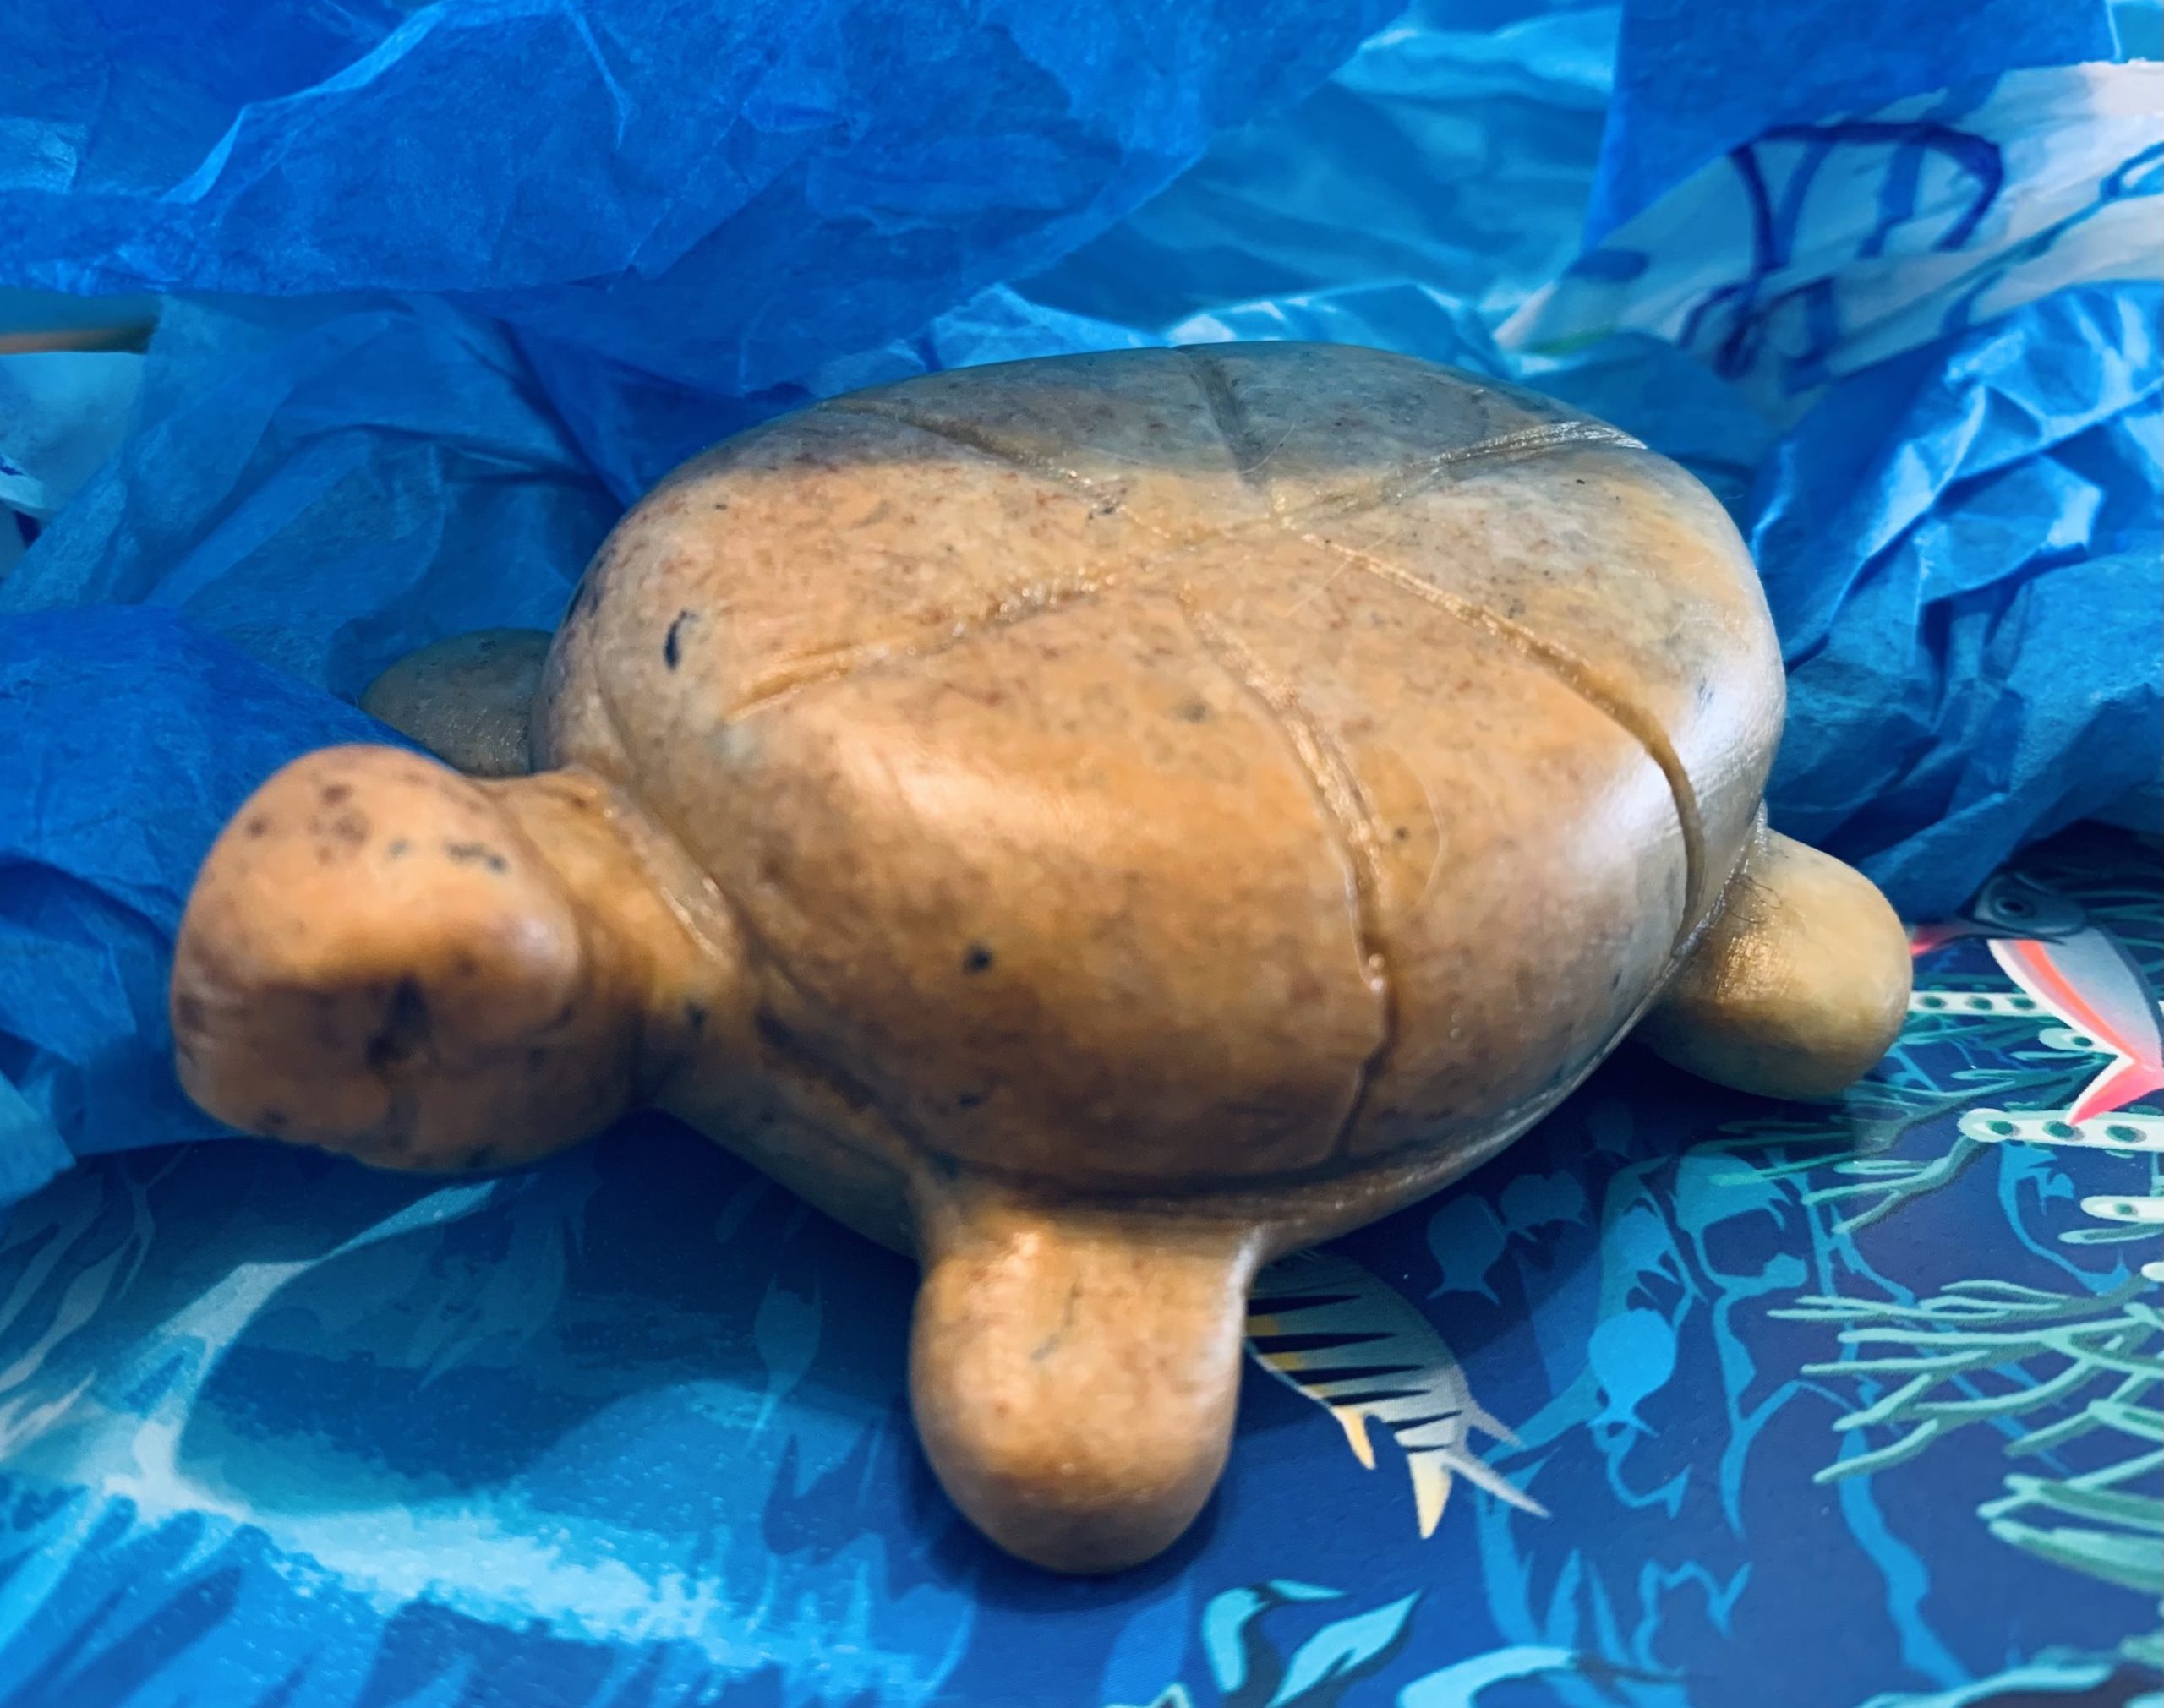 Turtle sculpture on a blue fabric